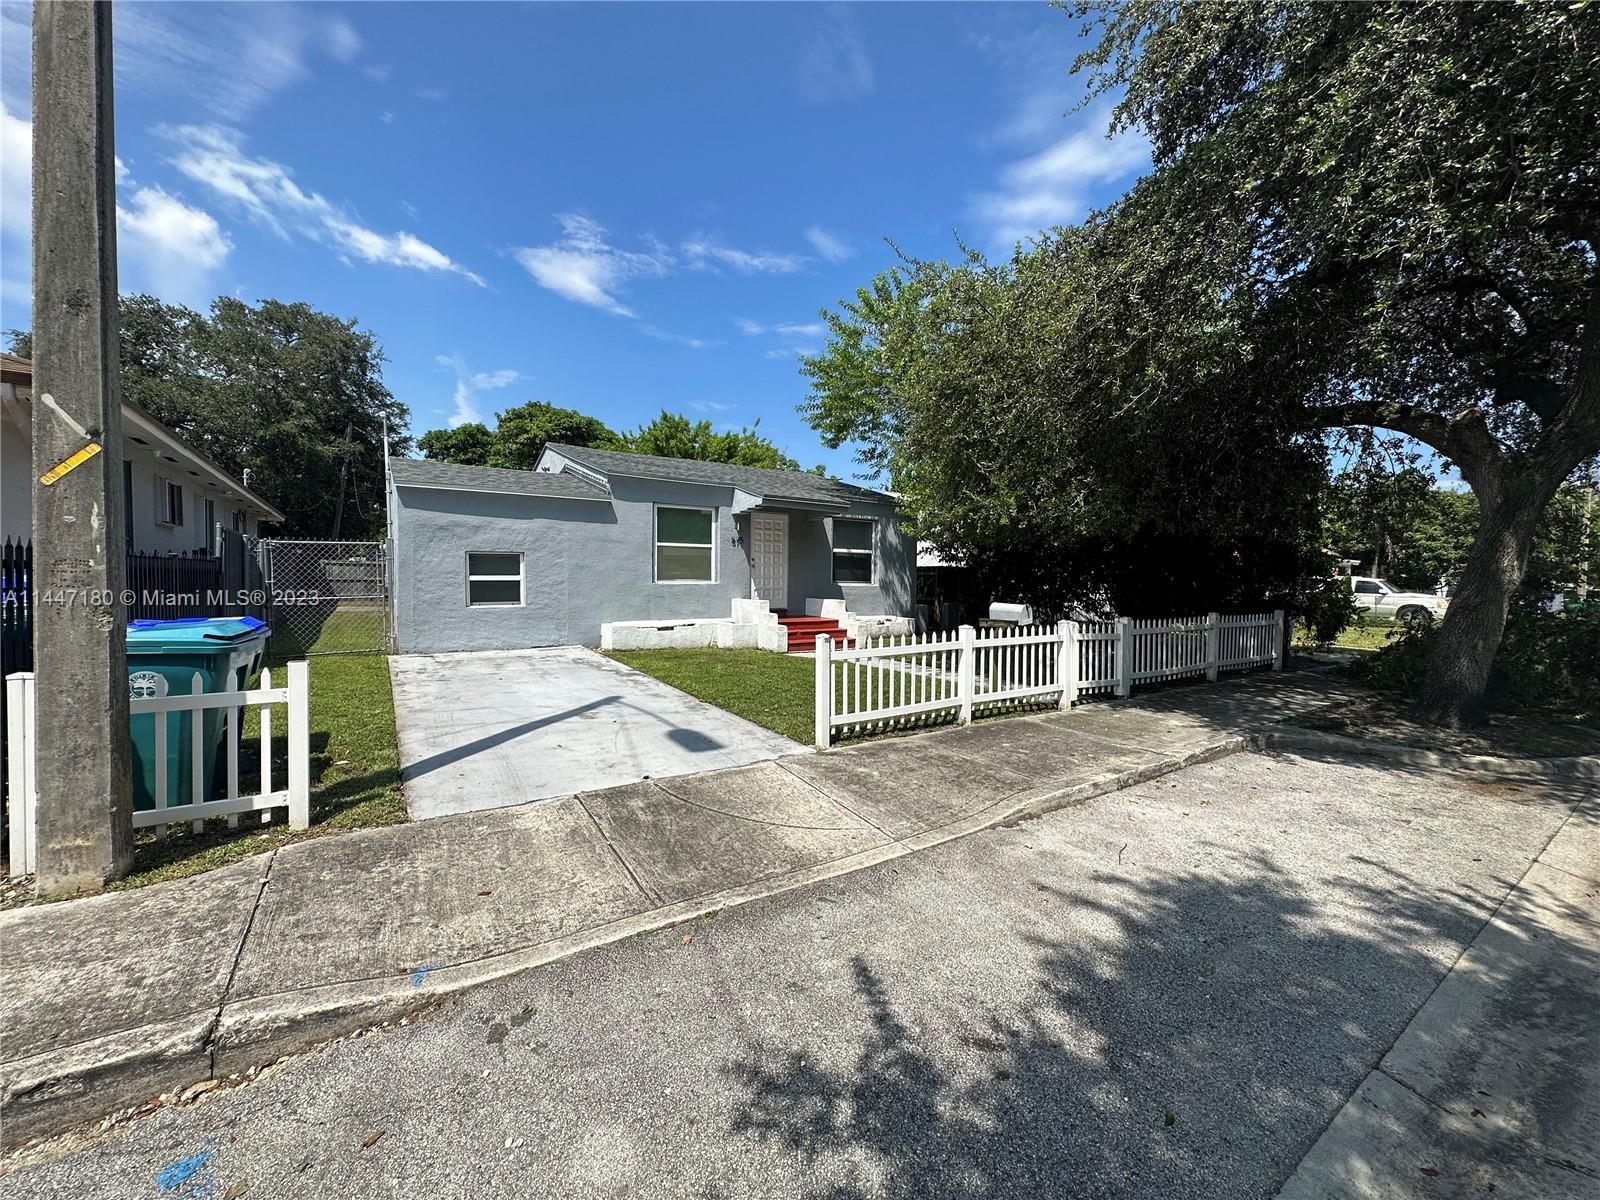 Photo of 575 NW 49th St in Miami, FL